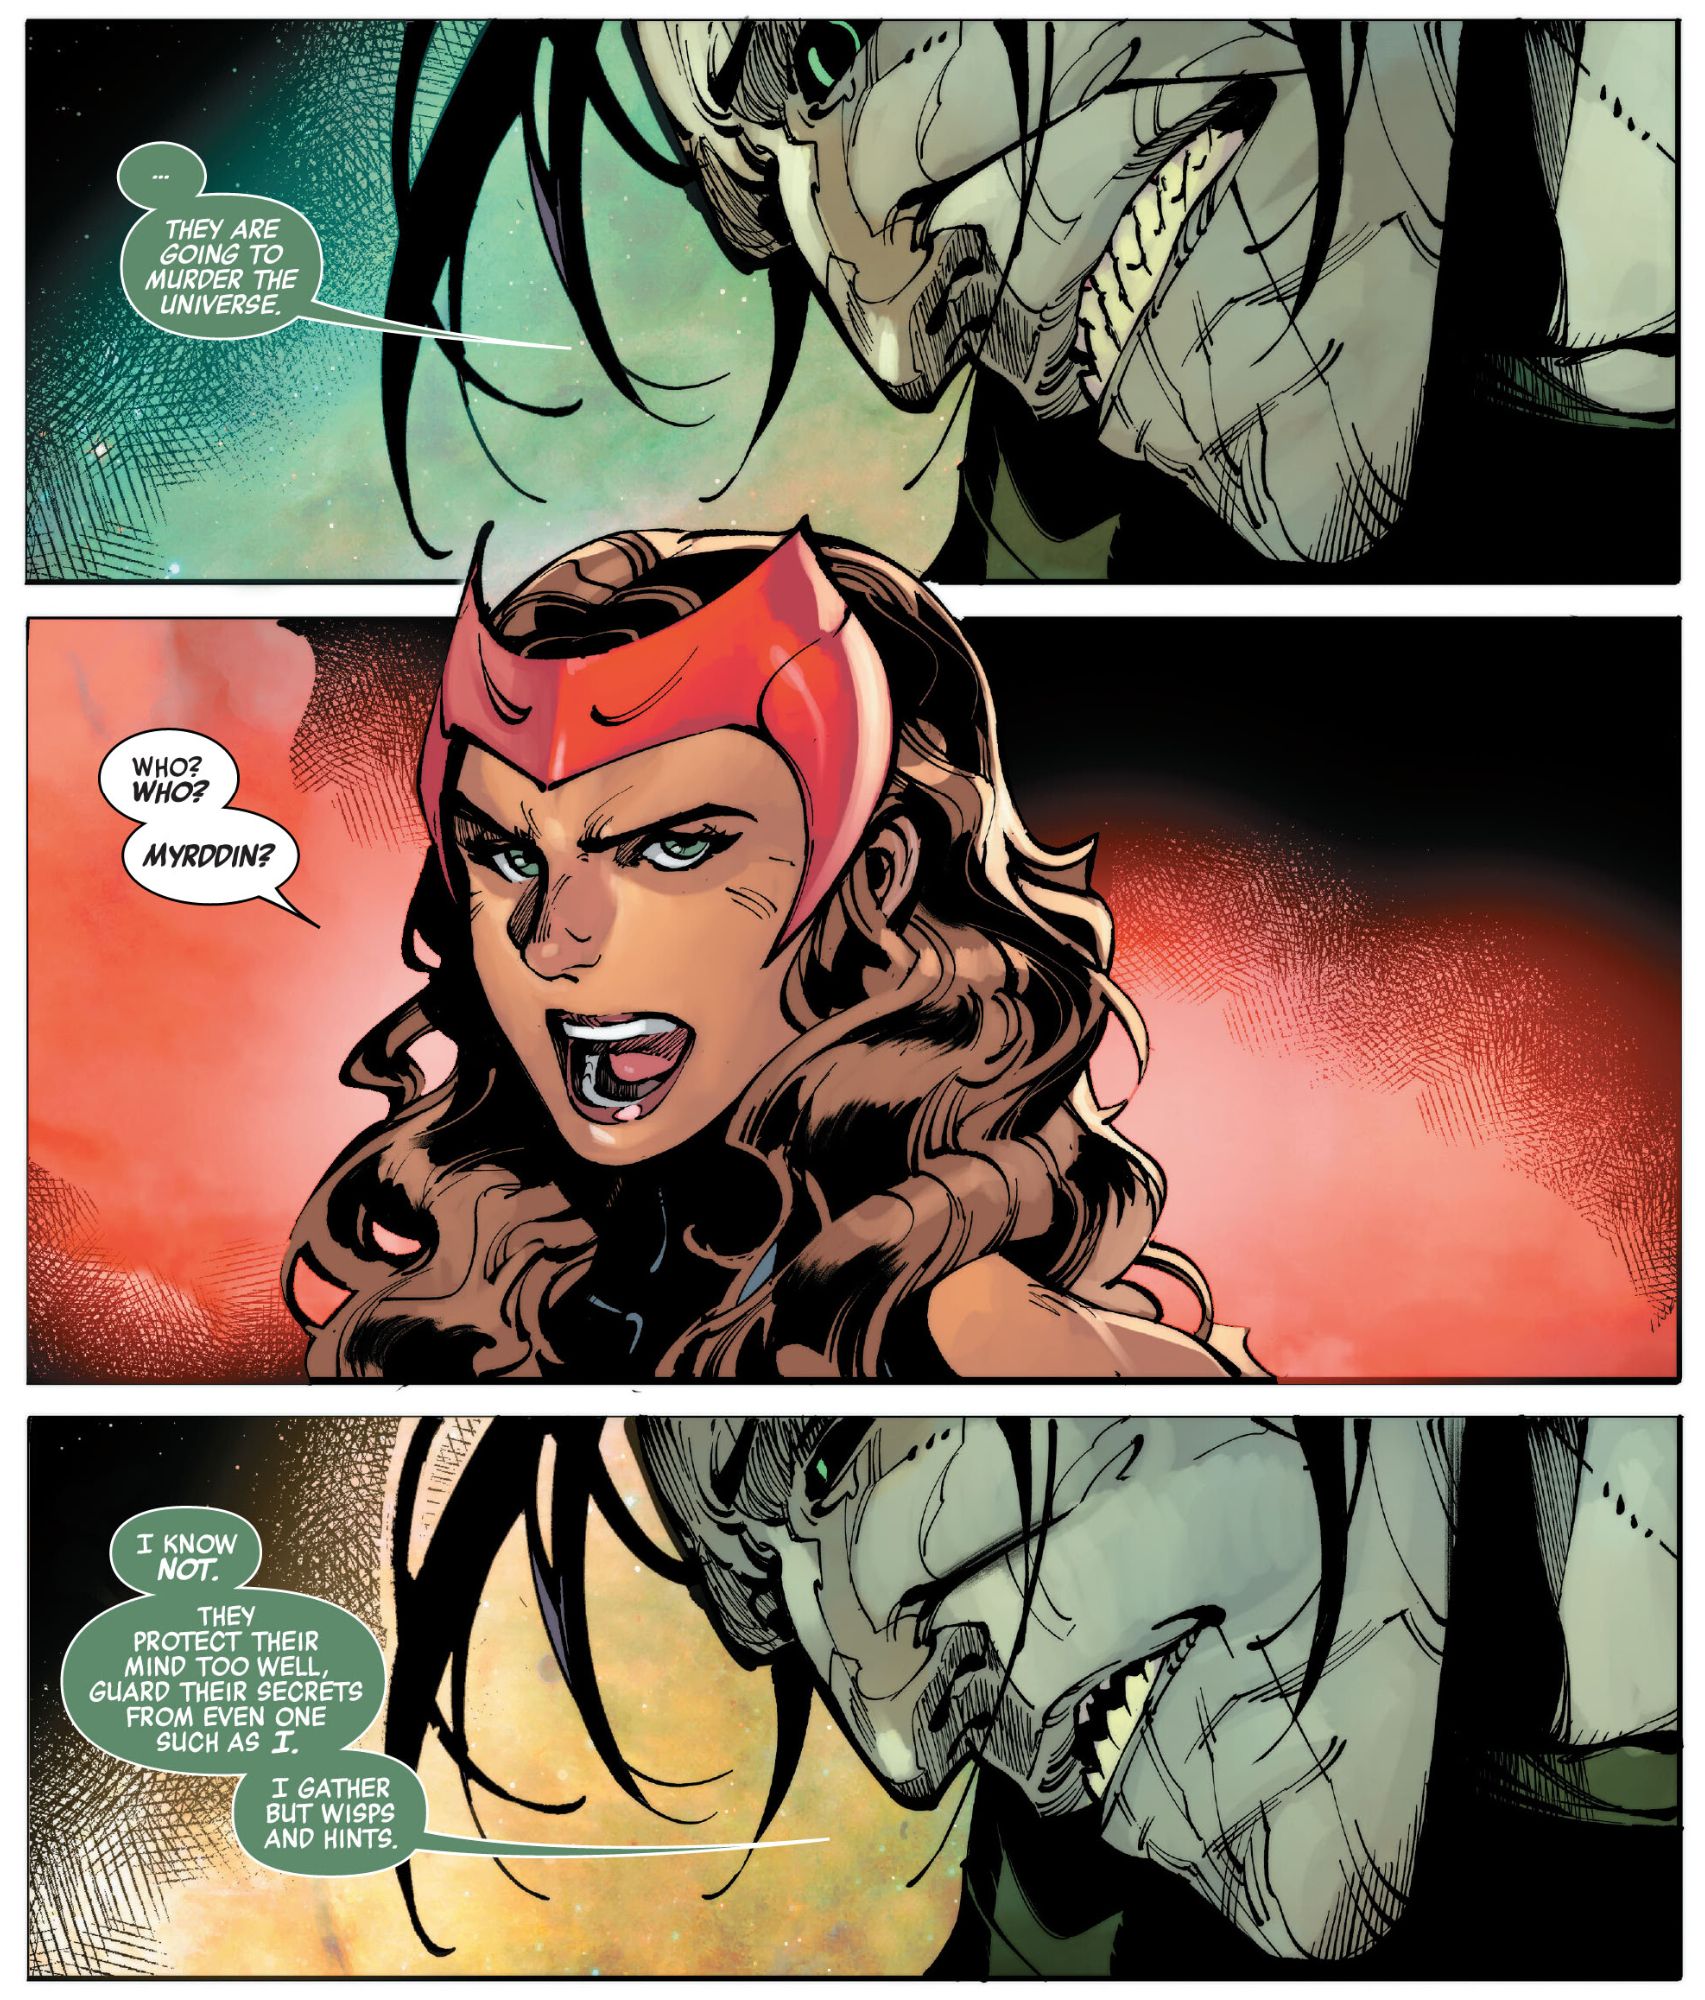 Comic book panels: Scarlet Witch and Nightmare discuss the coming threat. Wanda angrily demands information; Nightmare looks worn and haggard as he admits he hasn't been able to find much, but that 